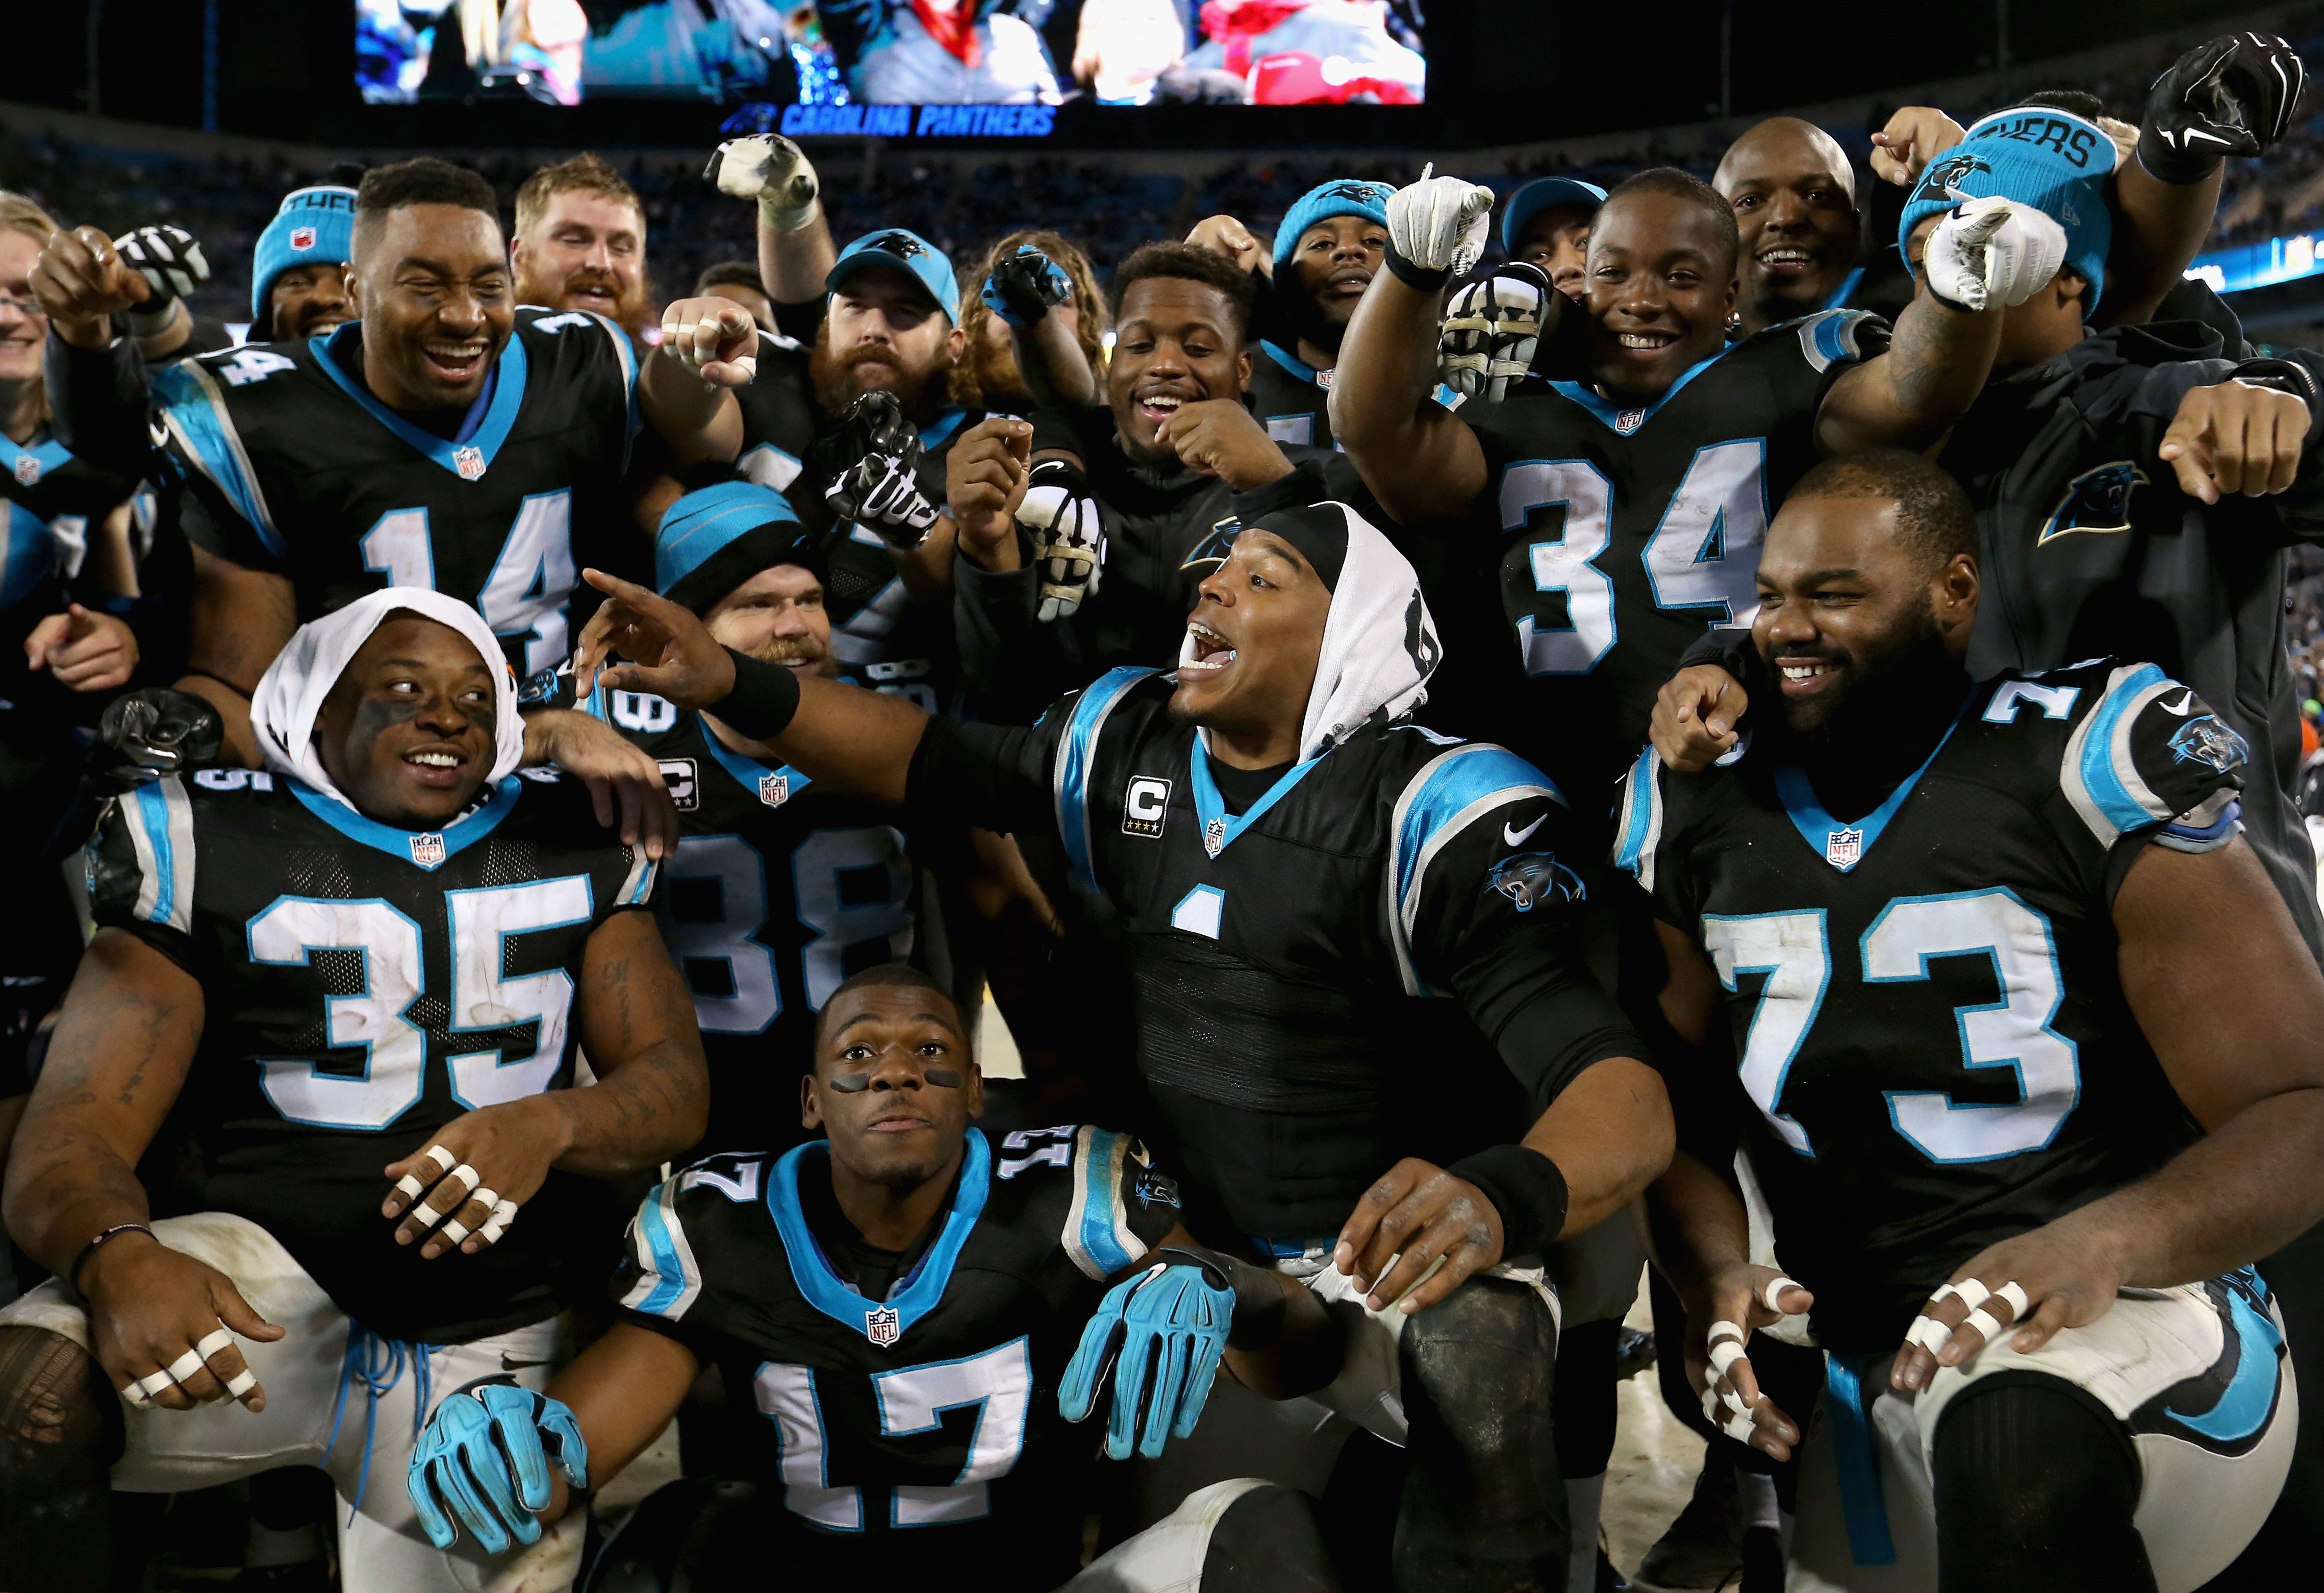 The Charlotte Observer - Panthers win 49-15! NFC Champions!